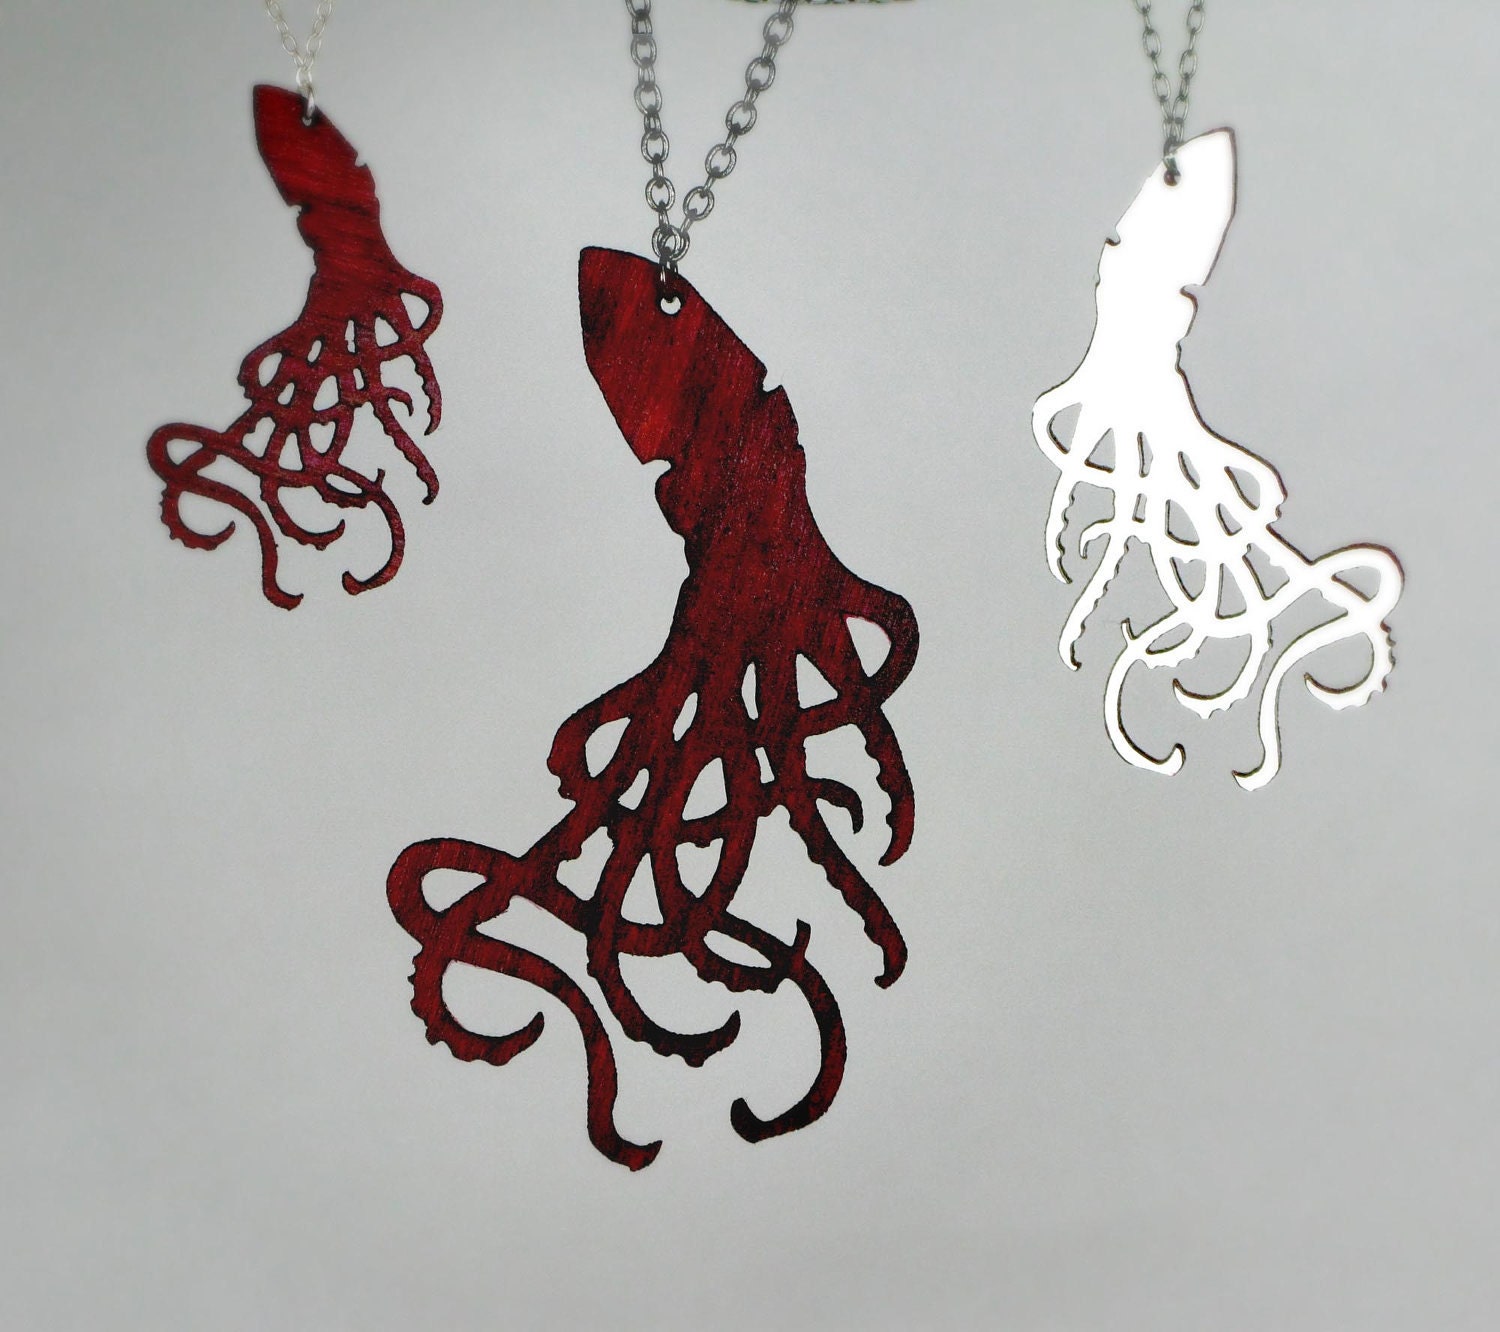 Squid Necklace Bordeaux Red Wood and Steel Reversible Pendant - OLIOTTO